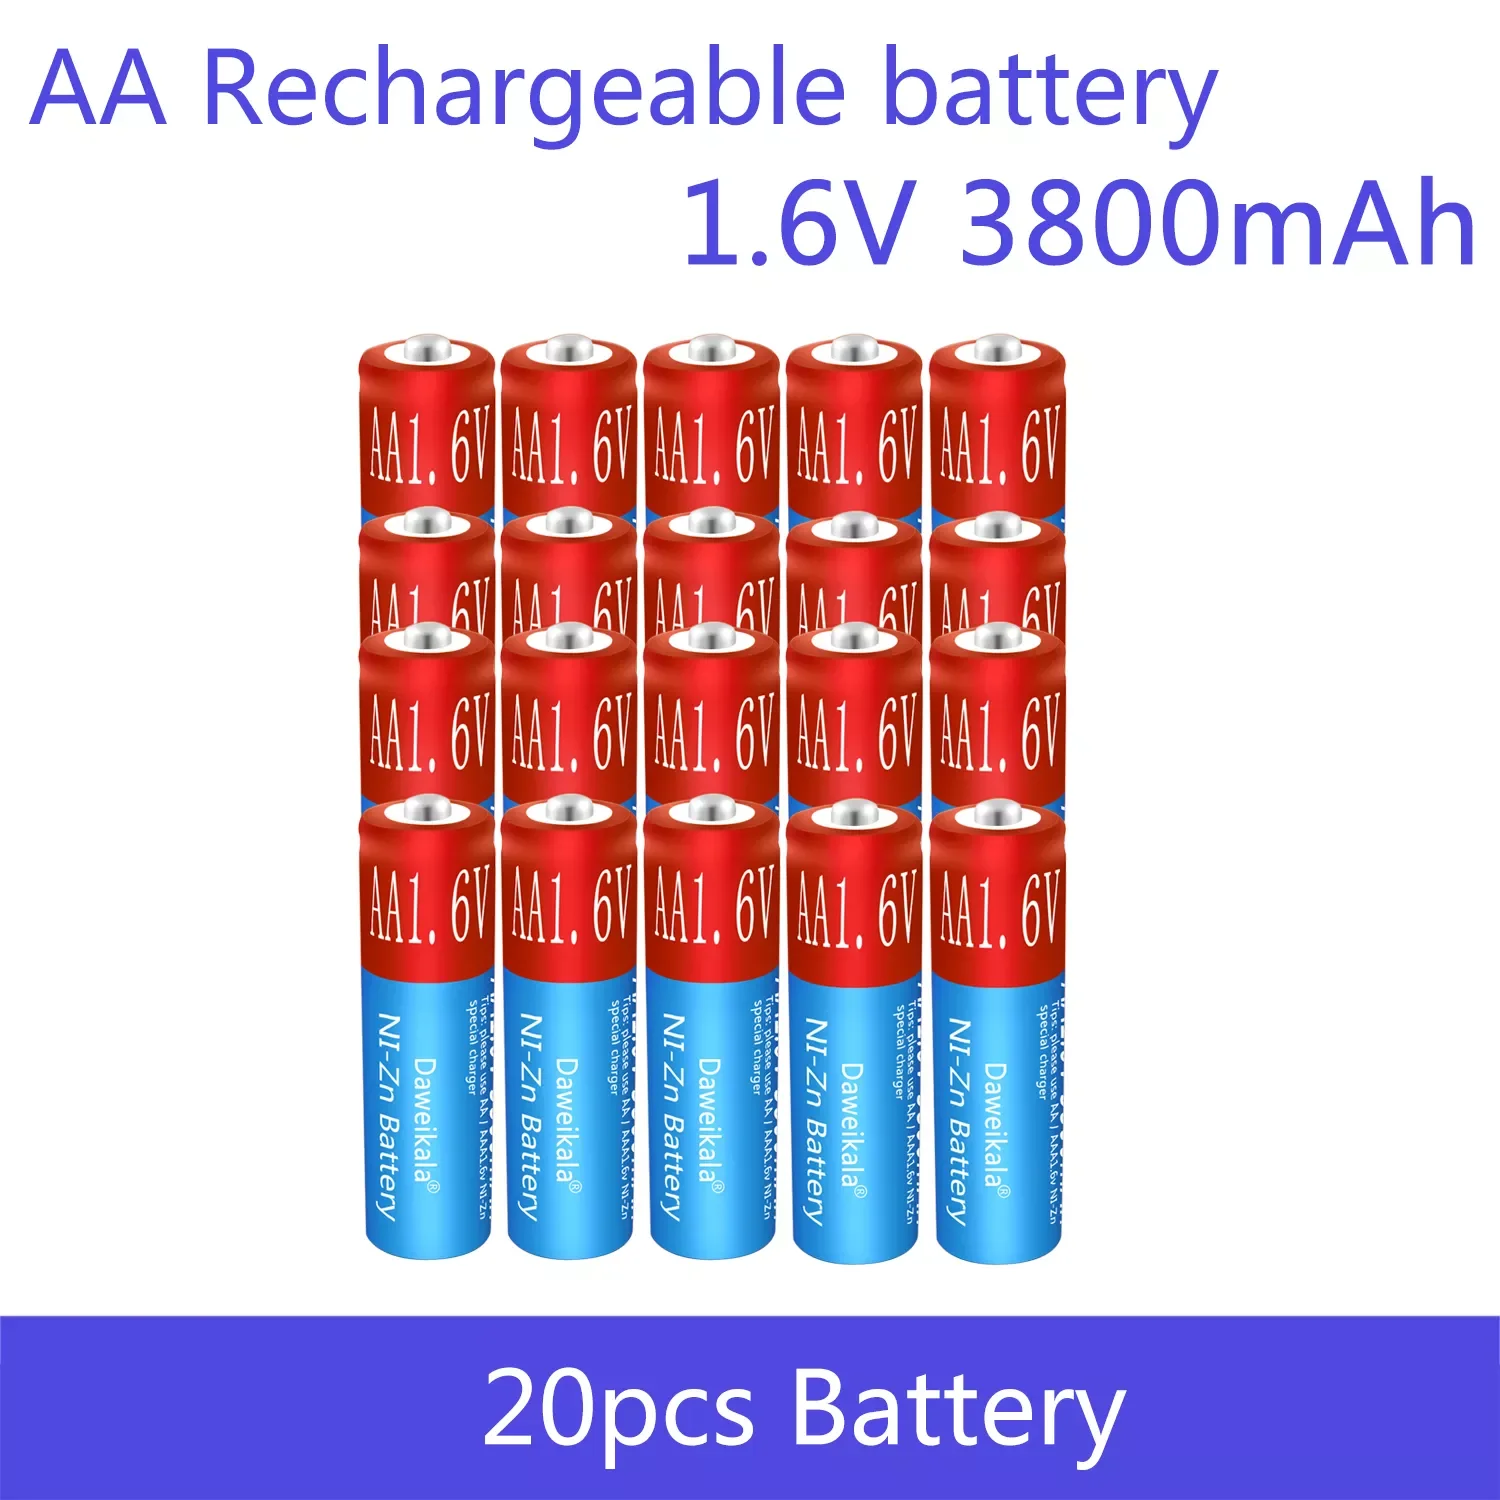 

20pcs/lot AA battery 3800mAh 1.6V Ni-Zn aa rechargeable battery Replace 1.5V/1.2V AA Battery for Toys Camera Remote control